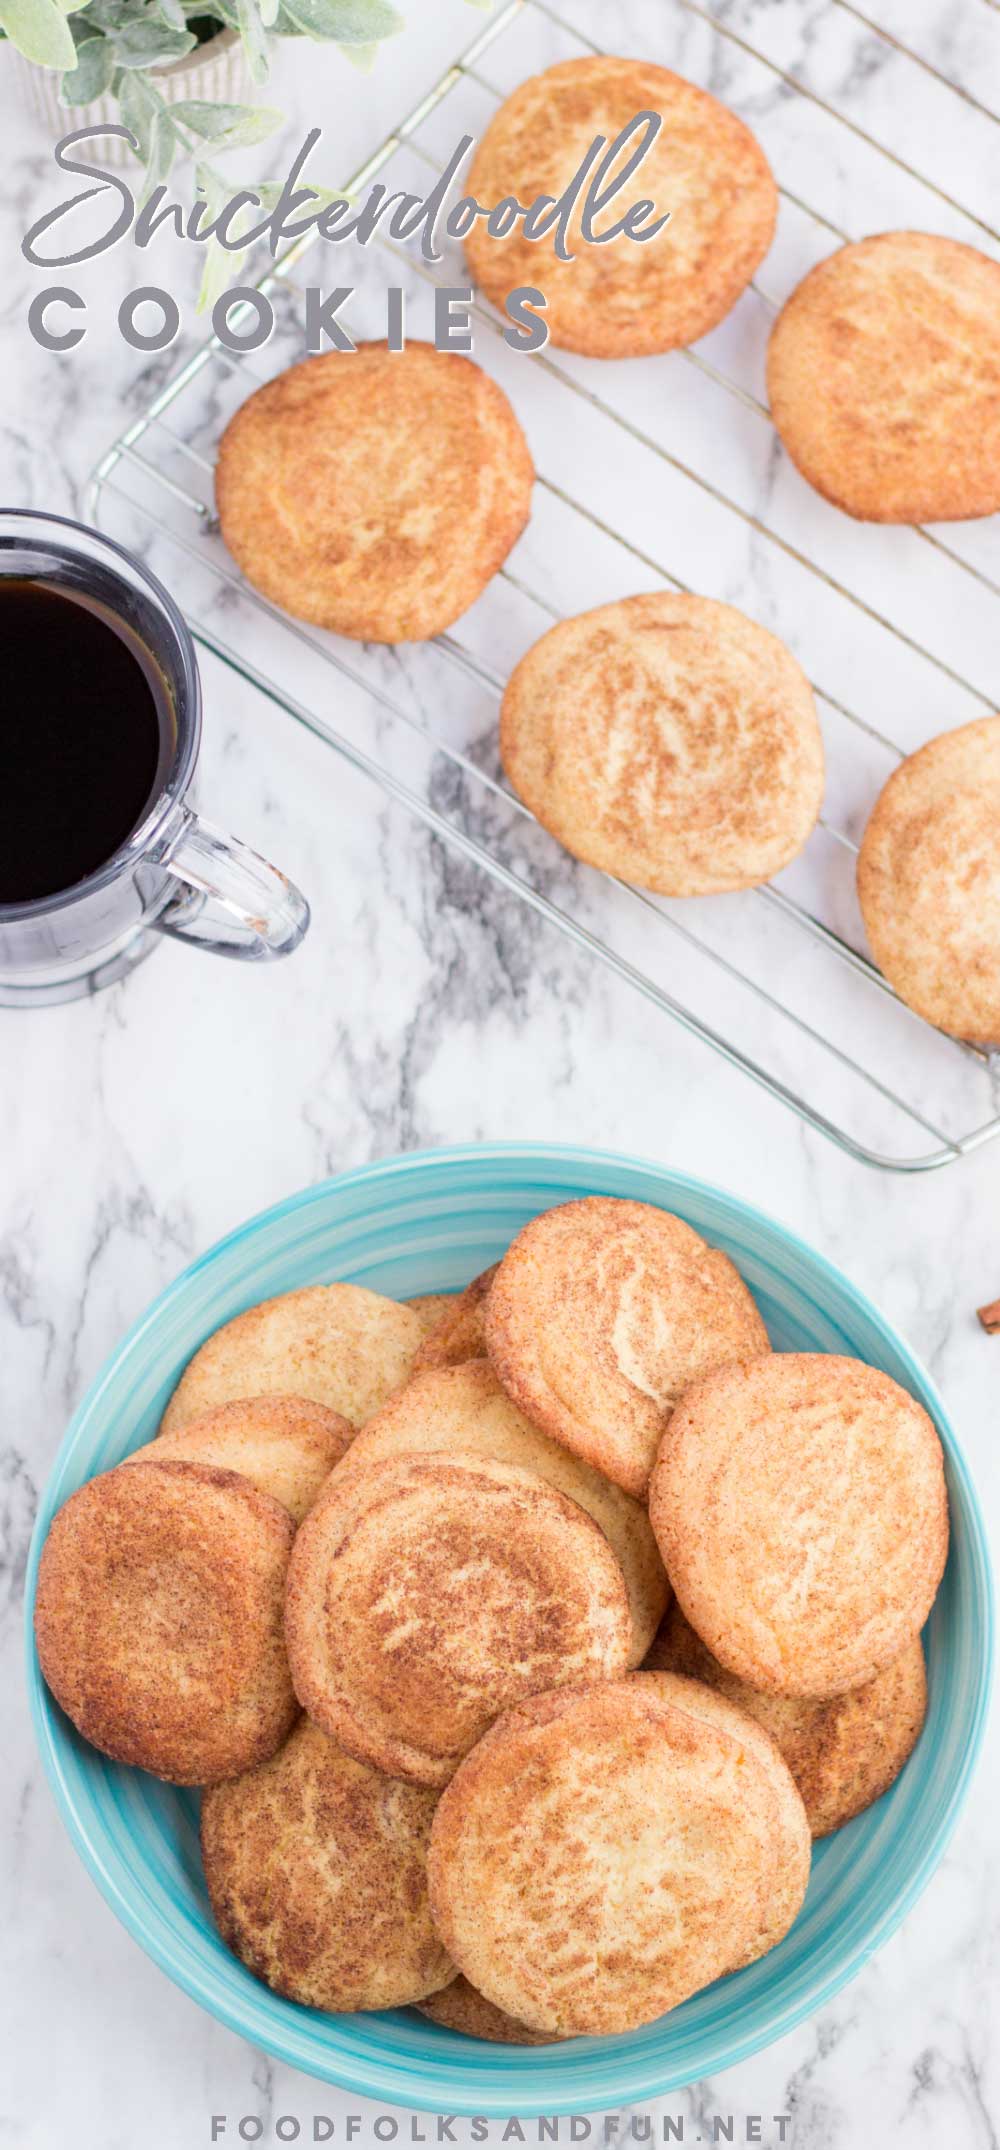 Snickerdoodle cookies on a plate and a wire rack